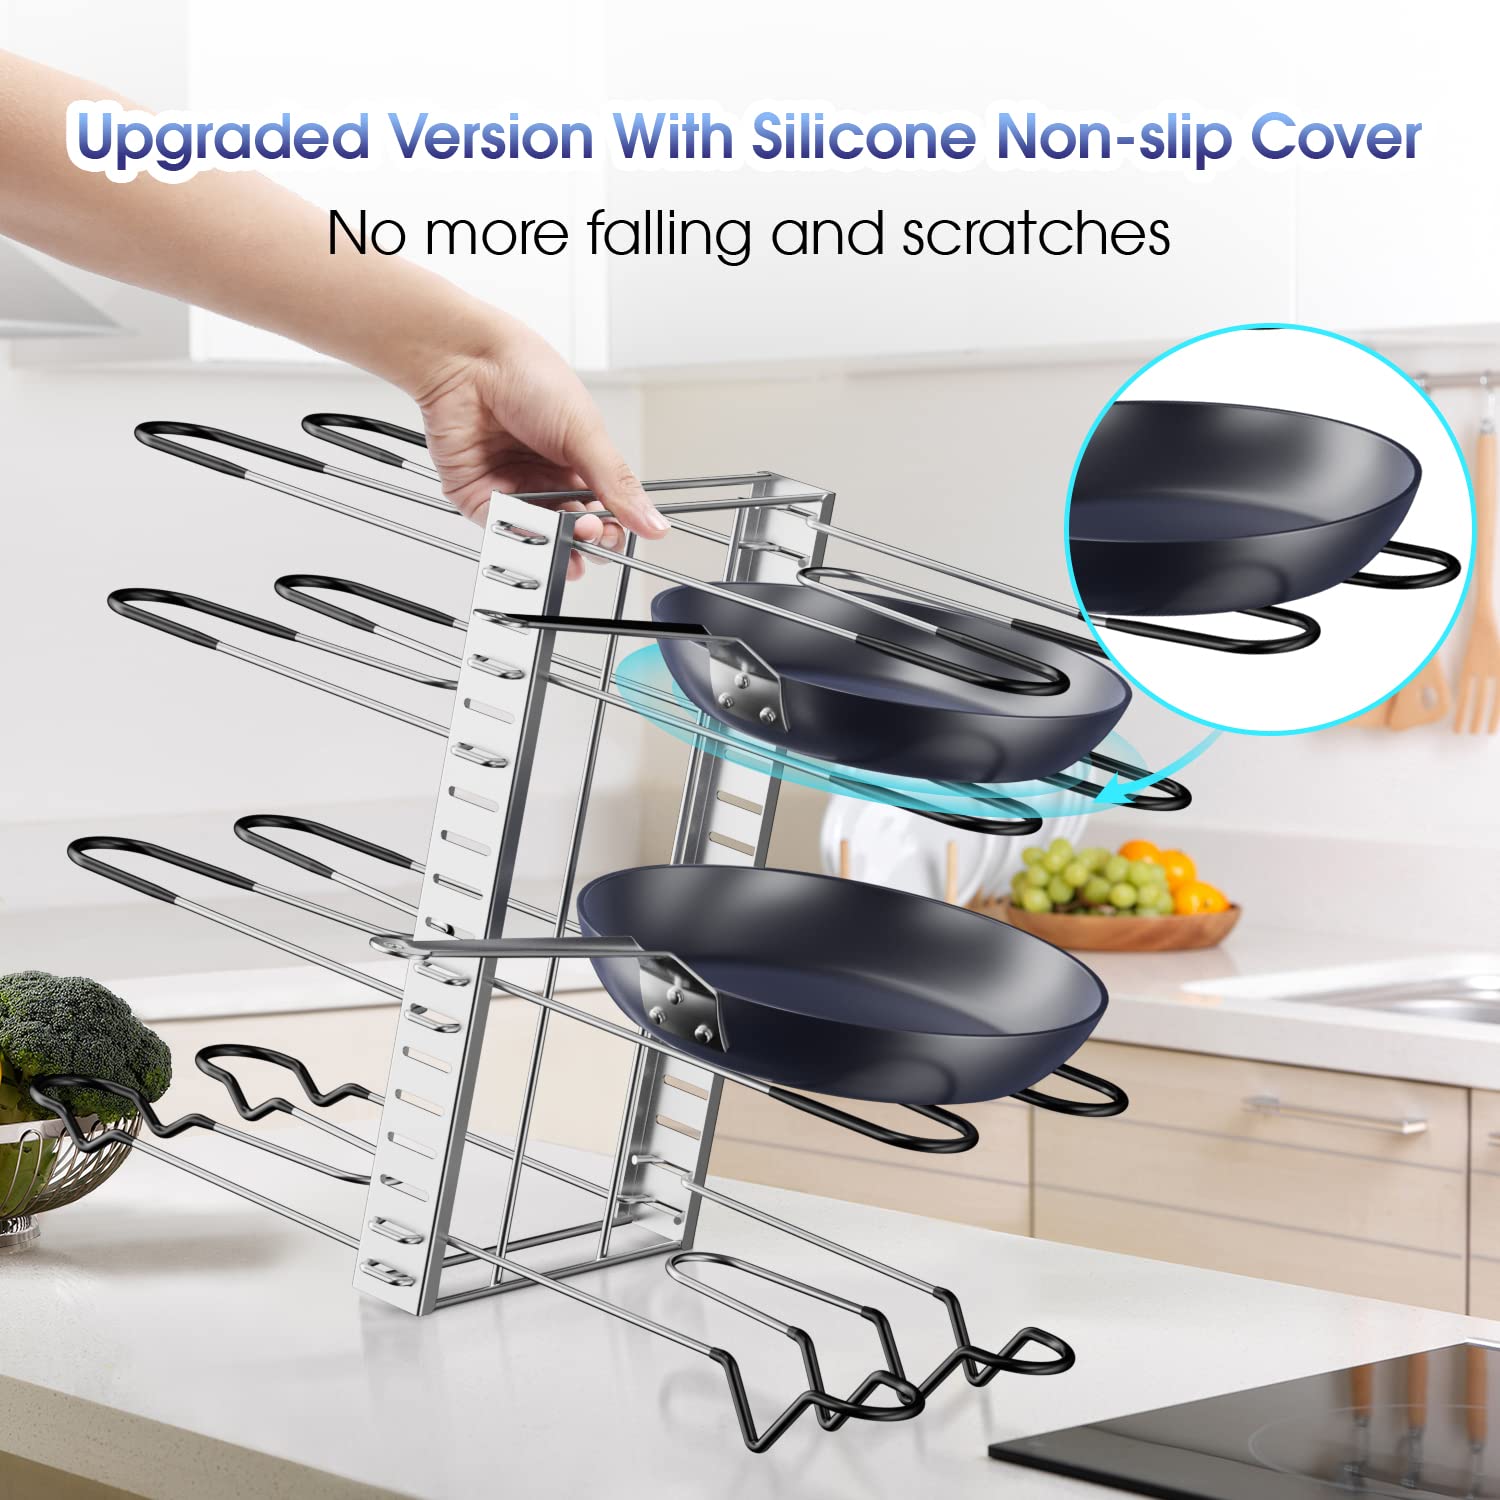 G-TING Pot Rack Organizers, 8 Tiers Pots and Pans Organizer for Kitchen Organization & Storage, Adjustable Pot Lid Holders & Pan Rack, Lid Organizer for Pots and Pans with 3 DIY Methods(Silver)